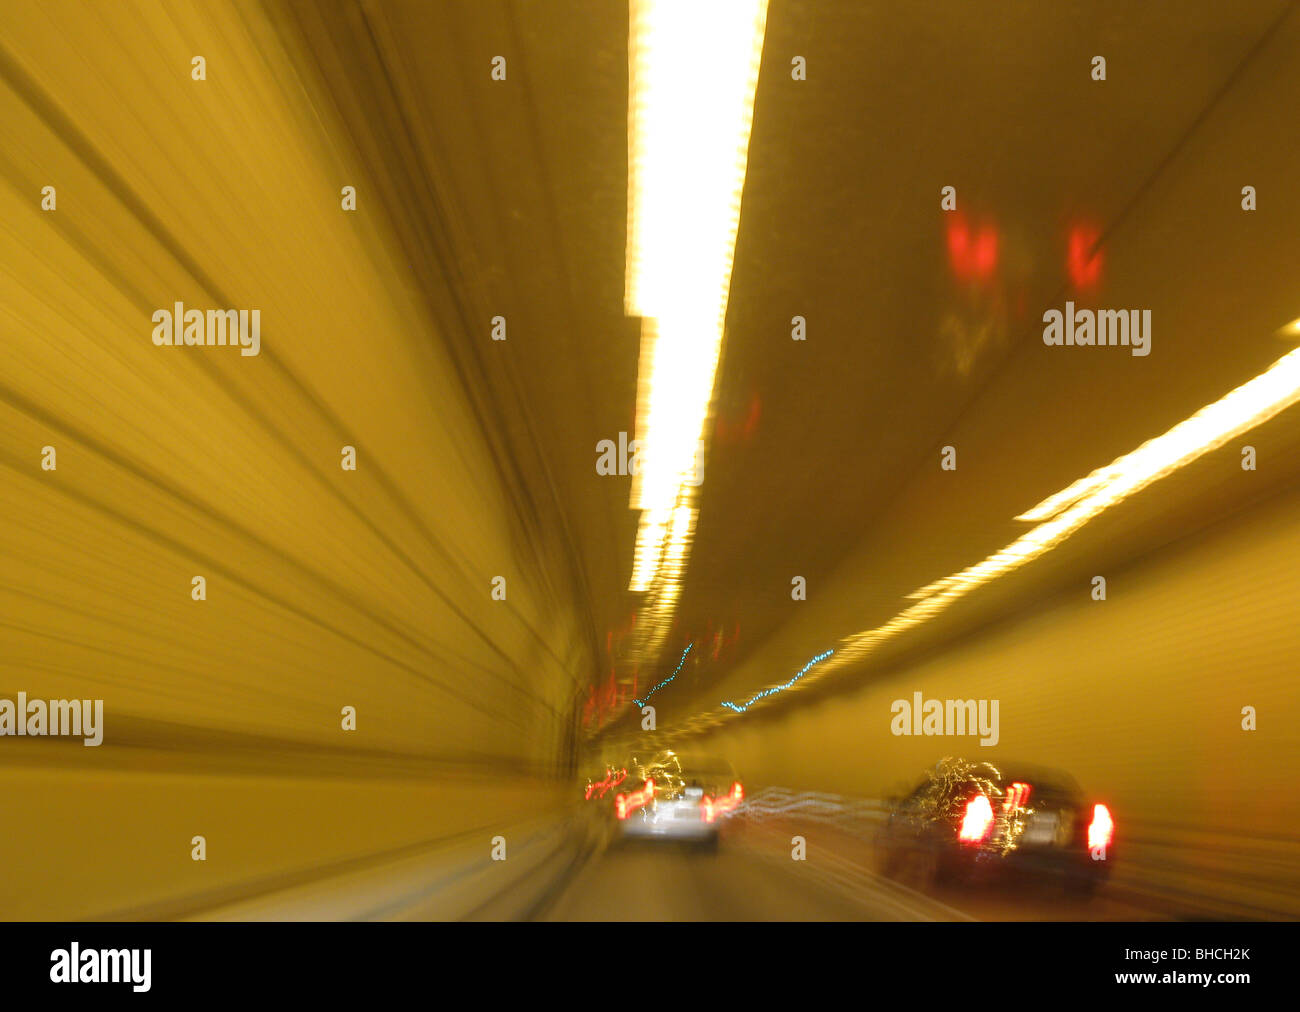 traffic in tunnel Stock Photo